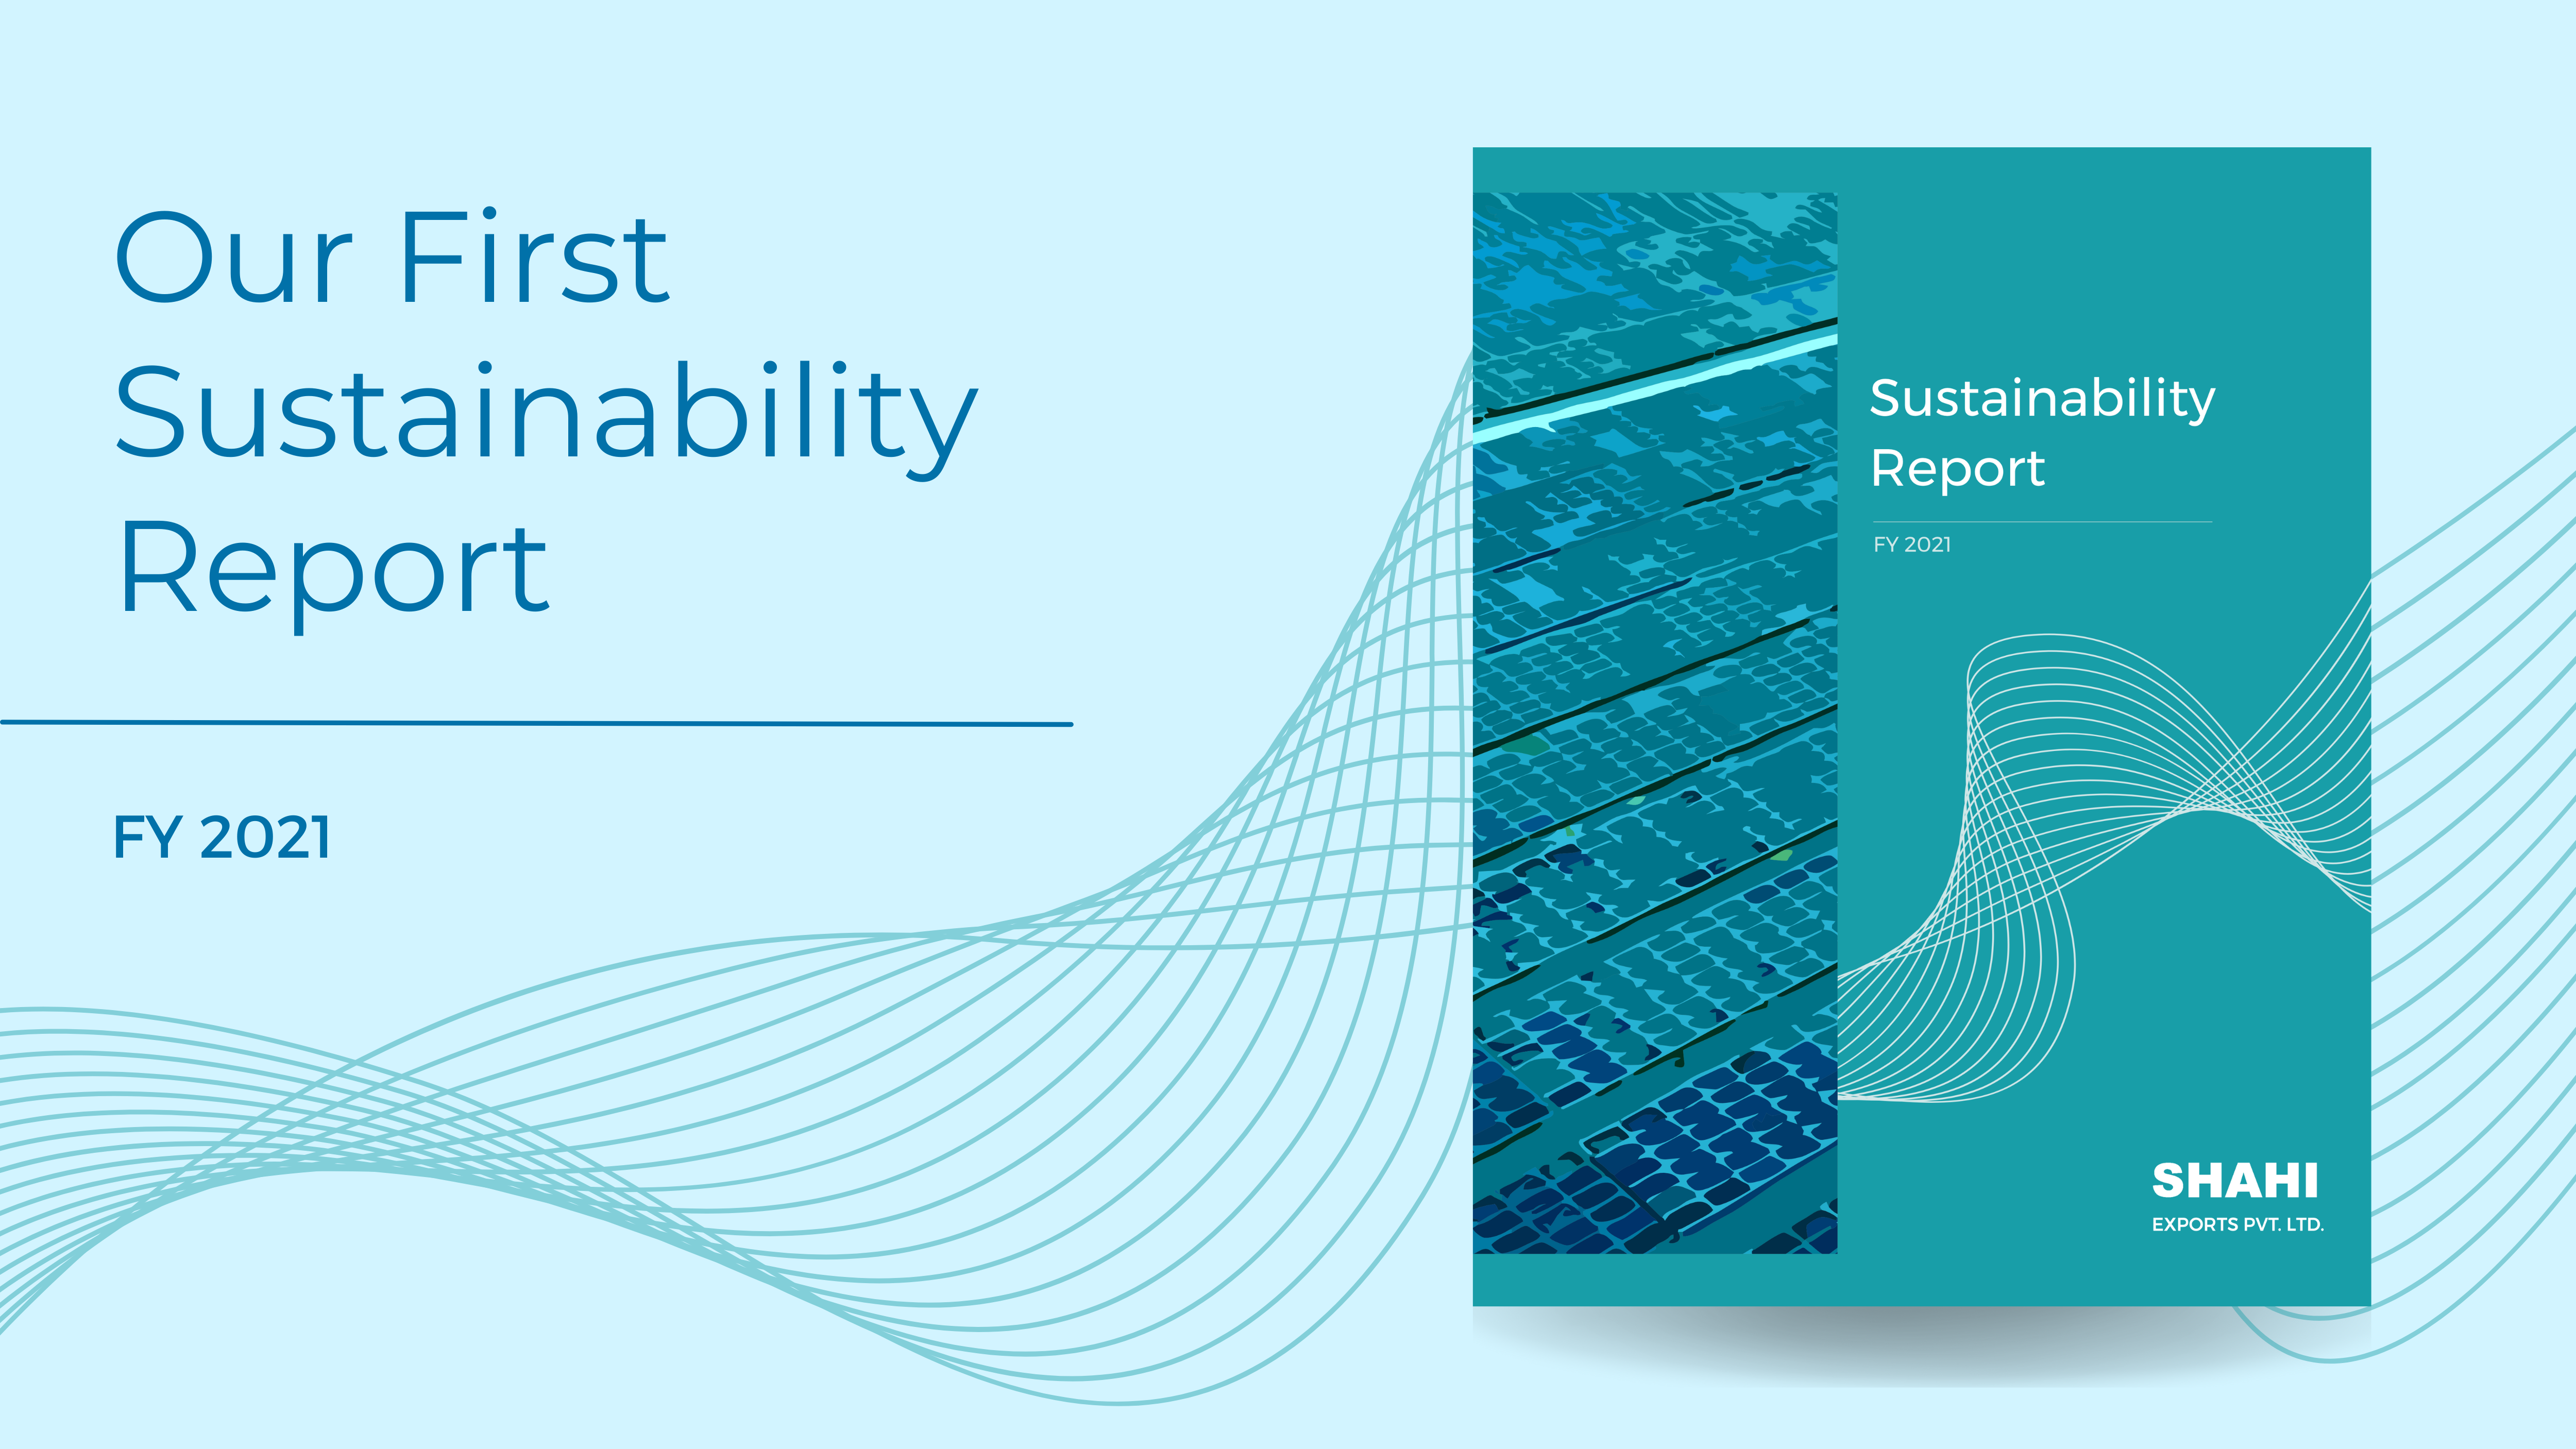 Shahi’s First Sustainability Report